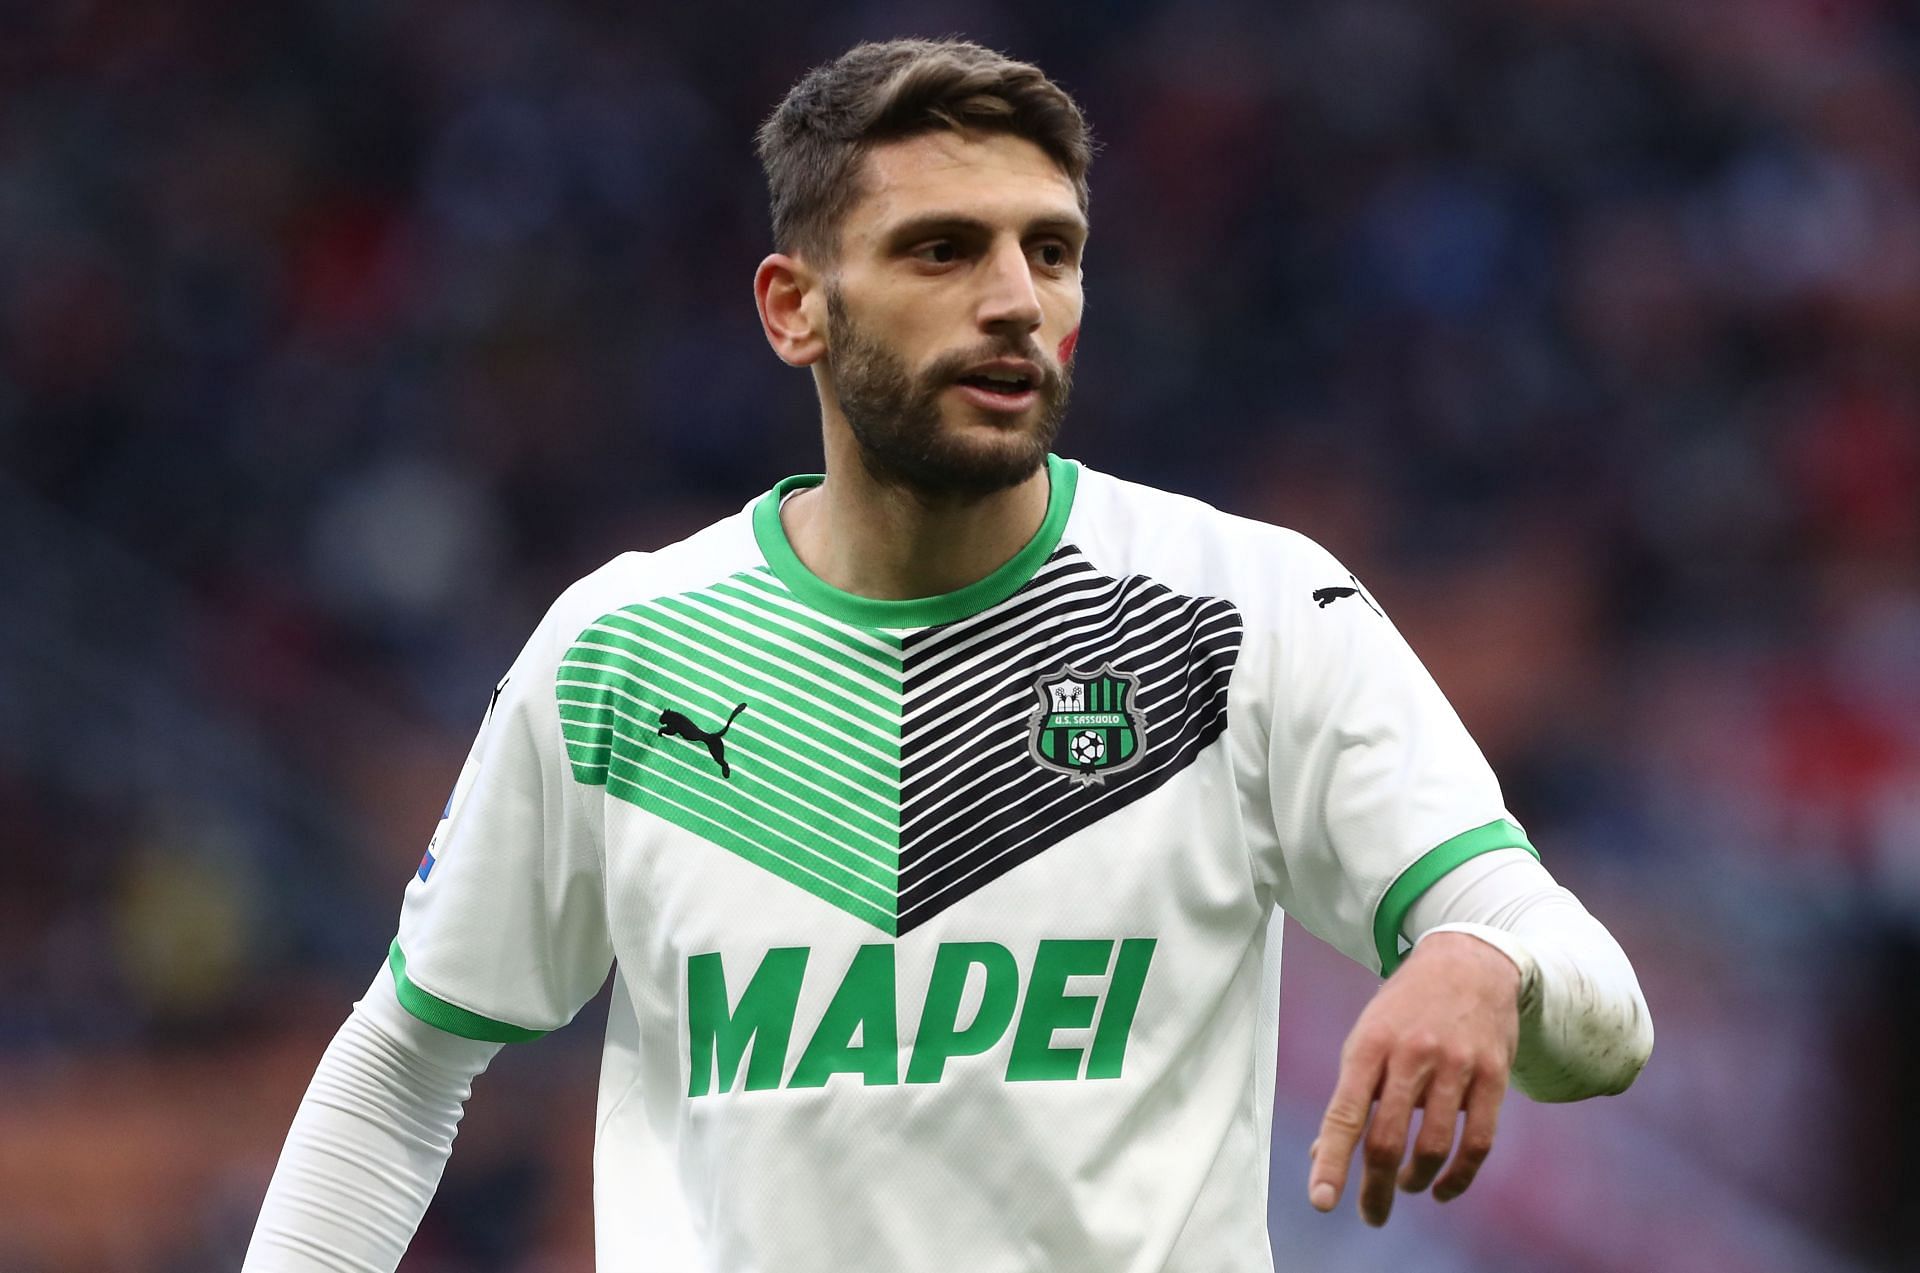 Berardi has been one of the best performers of Sassuolo